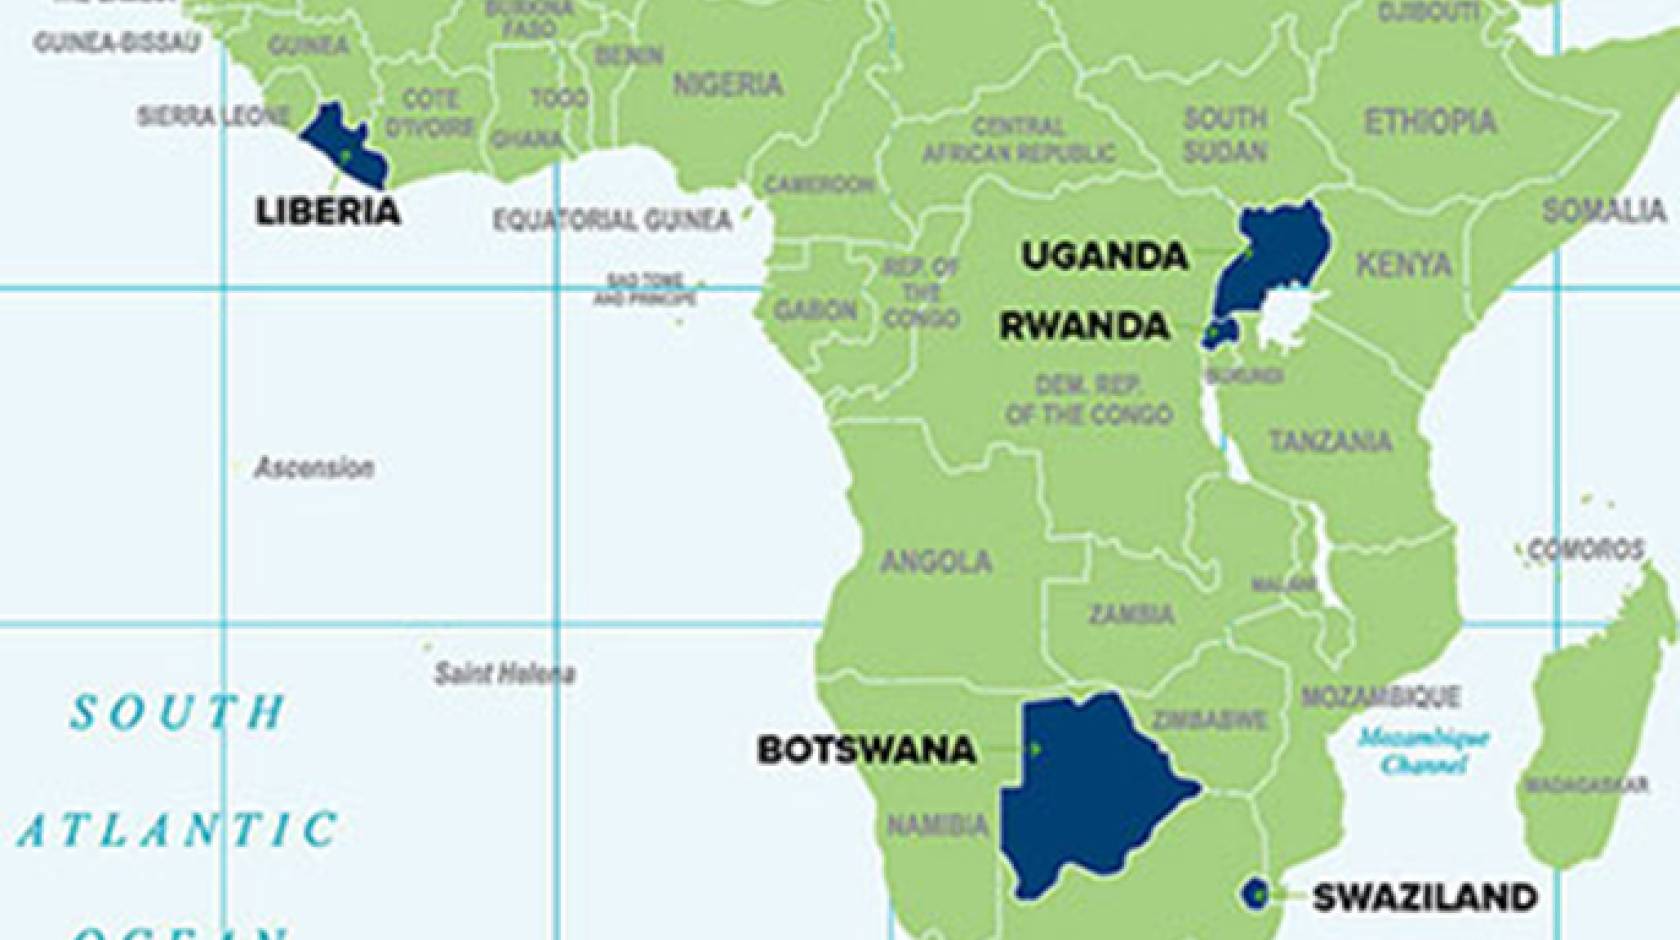 UC Davis pathologist Regina Gandour-Edwards is participating in an innovative telepathology project aimed at improving cancer diagnosis in Rwanda and five other sub-Saharan African countries (highlighted in blue).